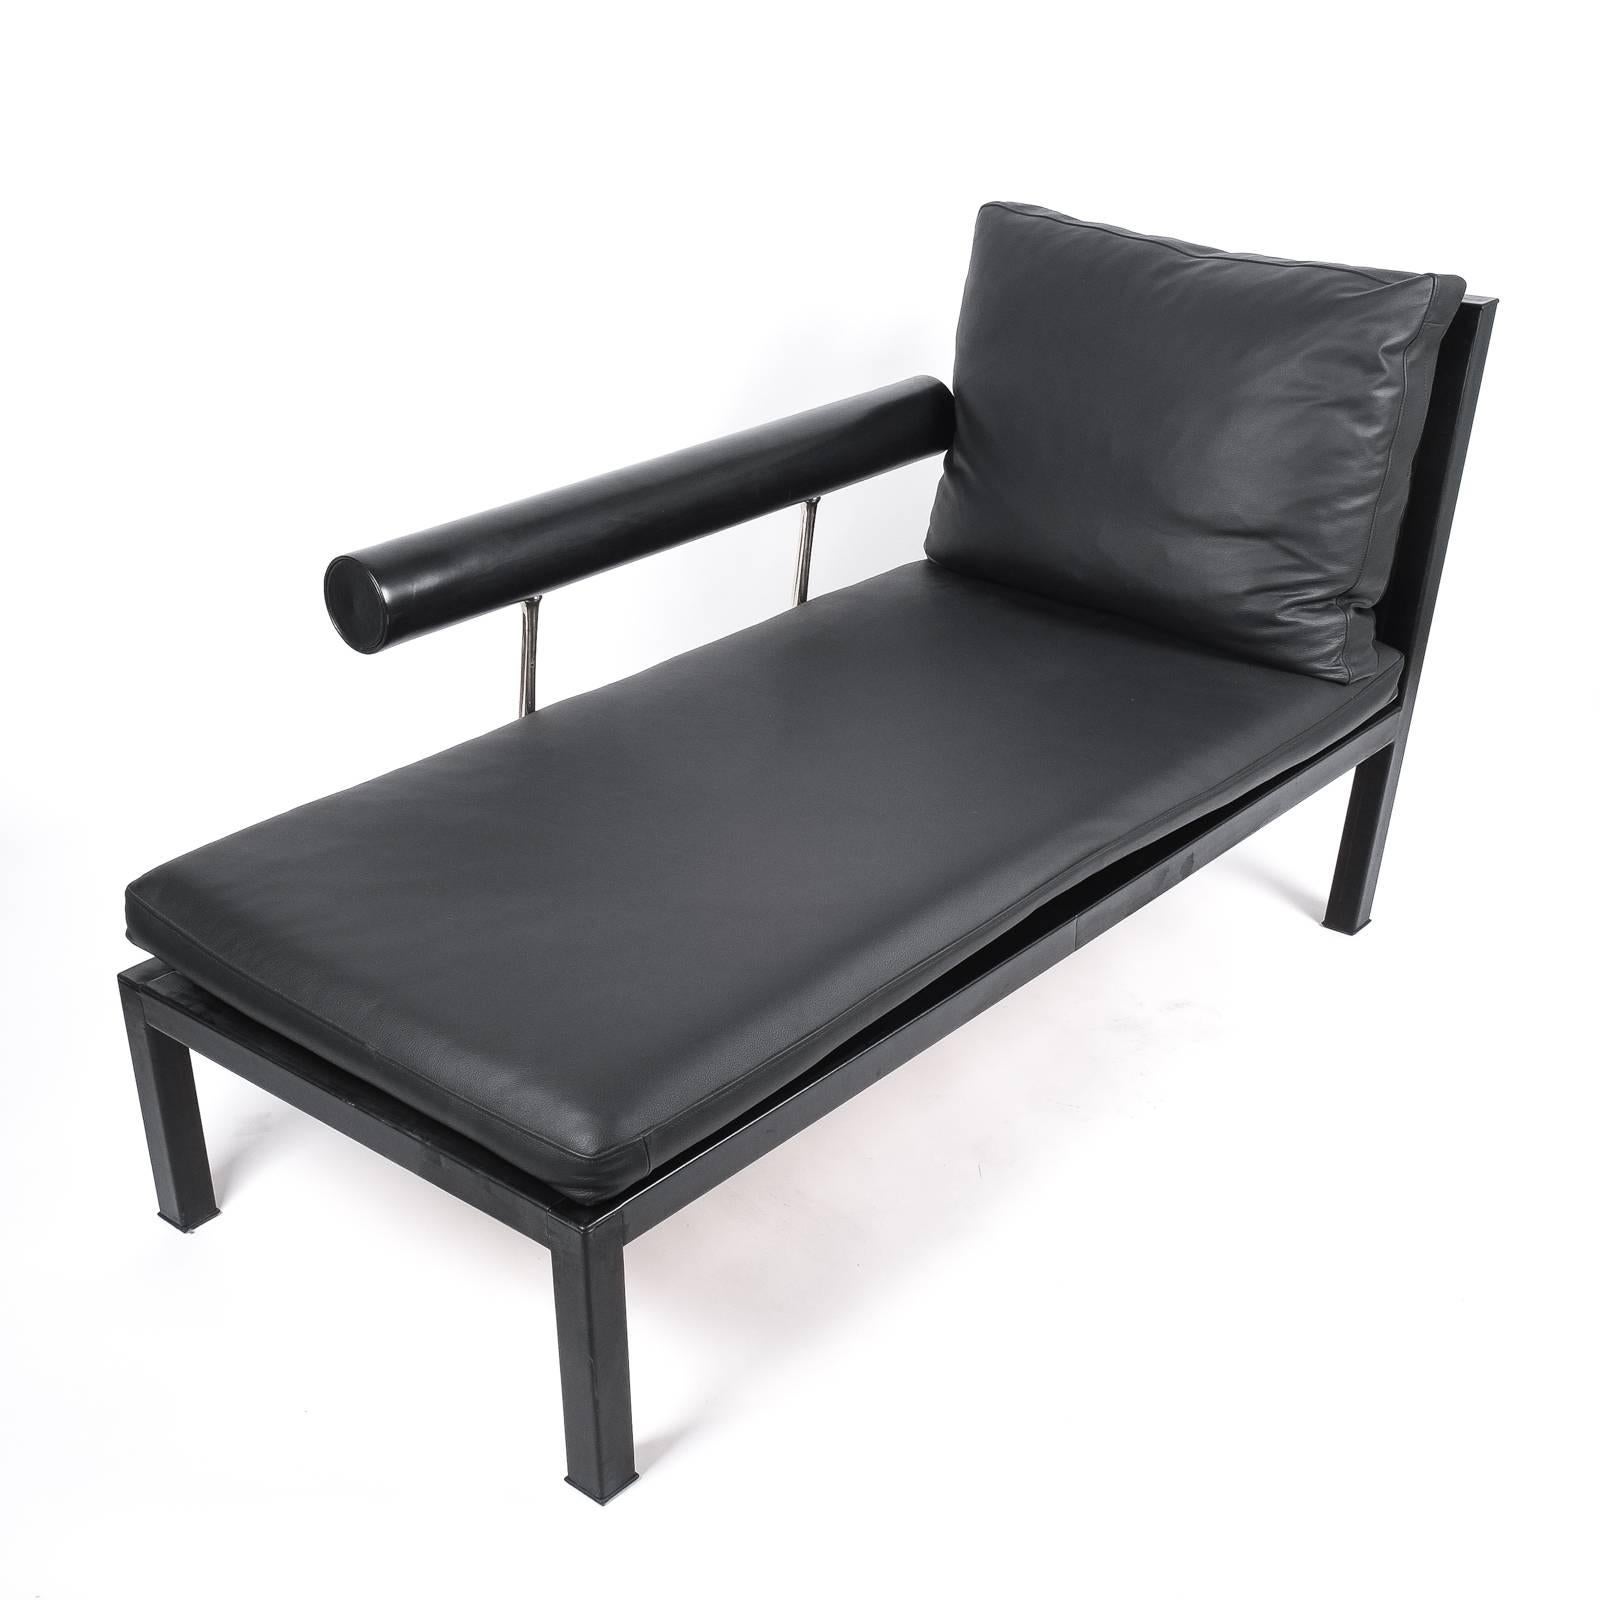 Post-Modern Elegant Leather Chaise Longue by Antonio Citterio for B&B Italy